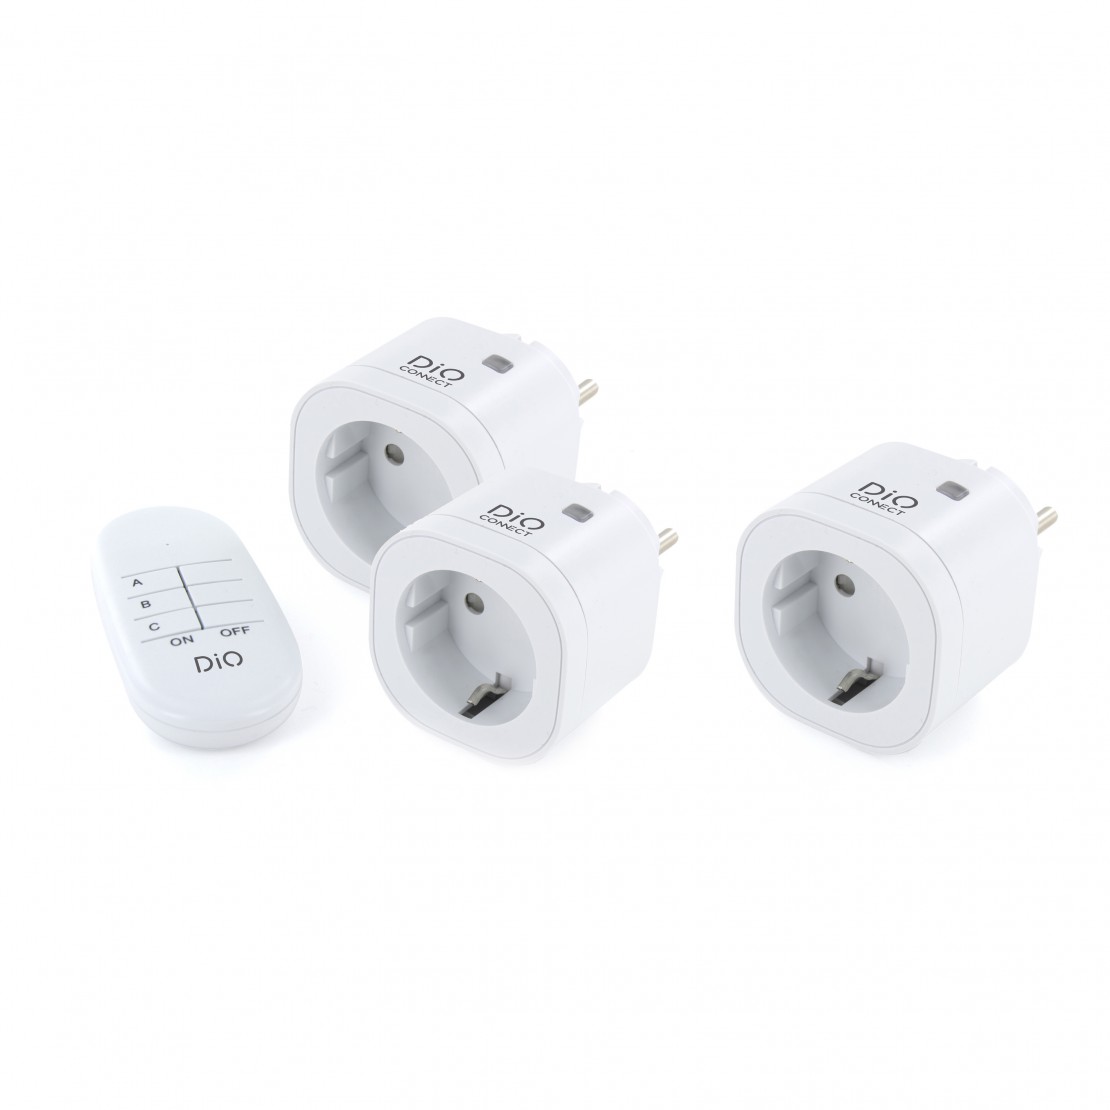 https://chacon.com/12520-large_default/2-connected-plugs-with-remote-control-dio-connect.jpg